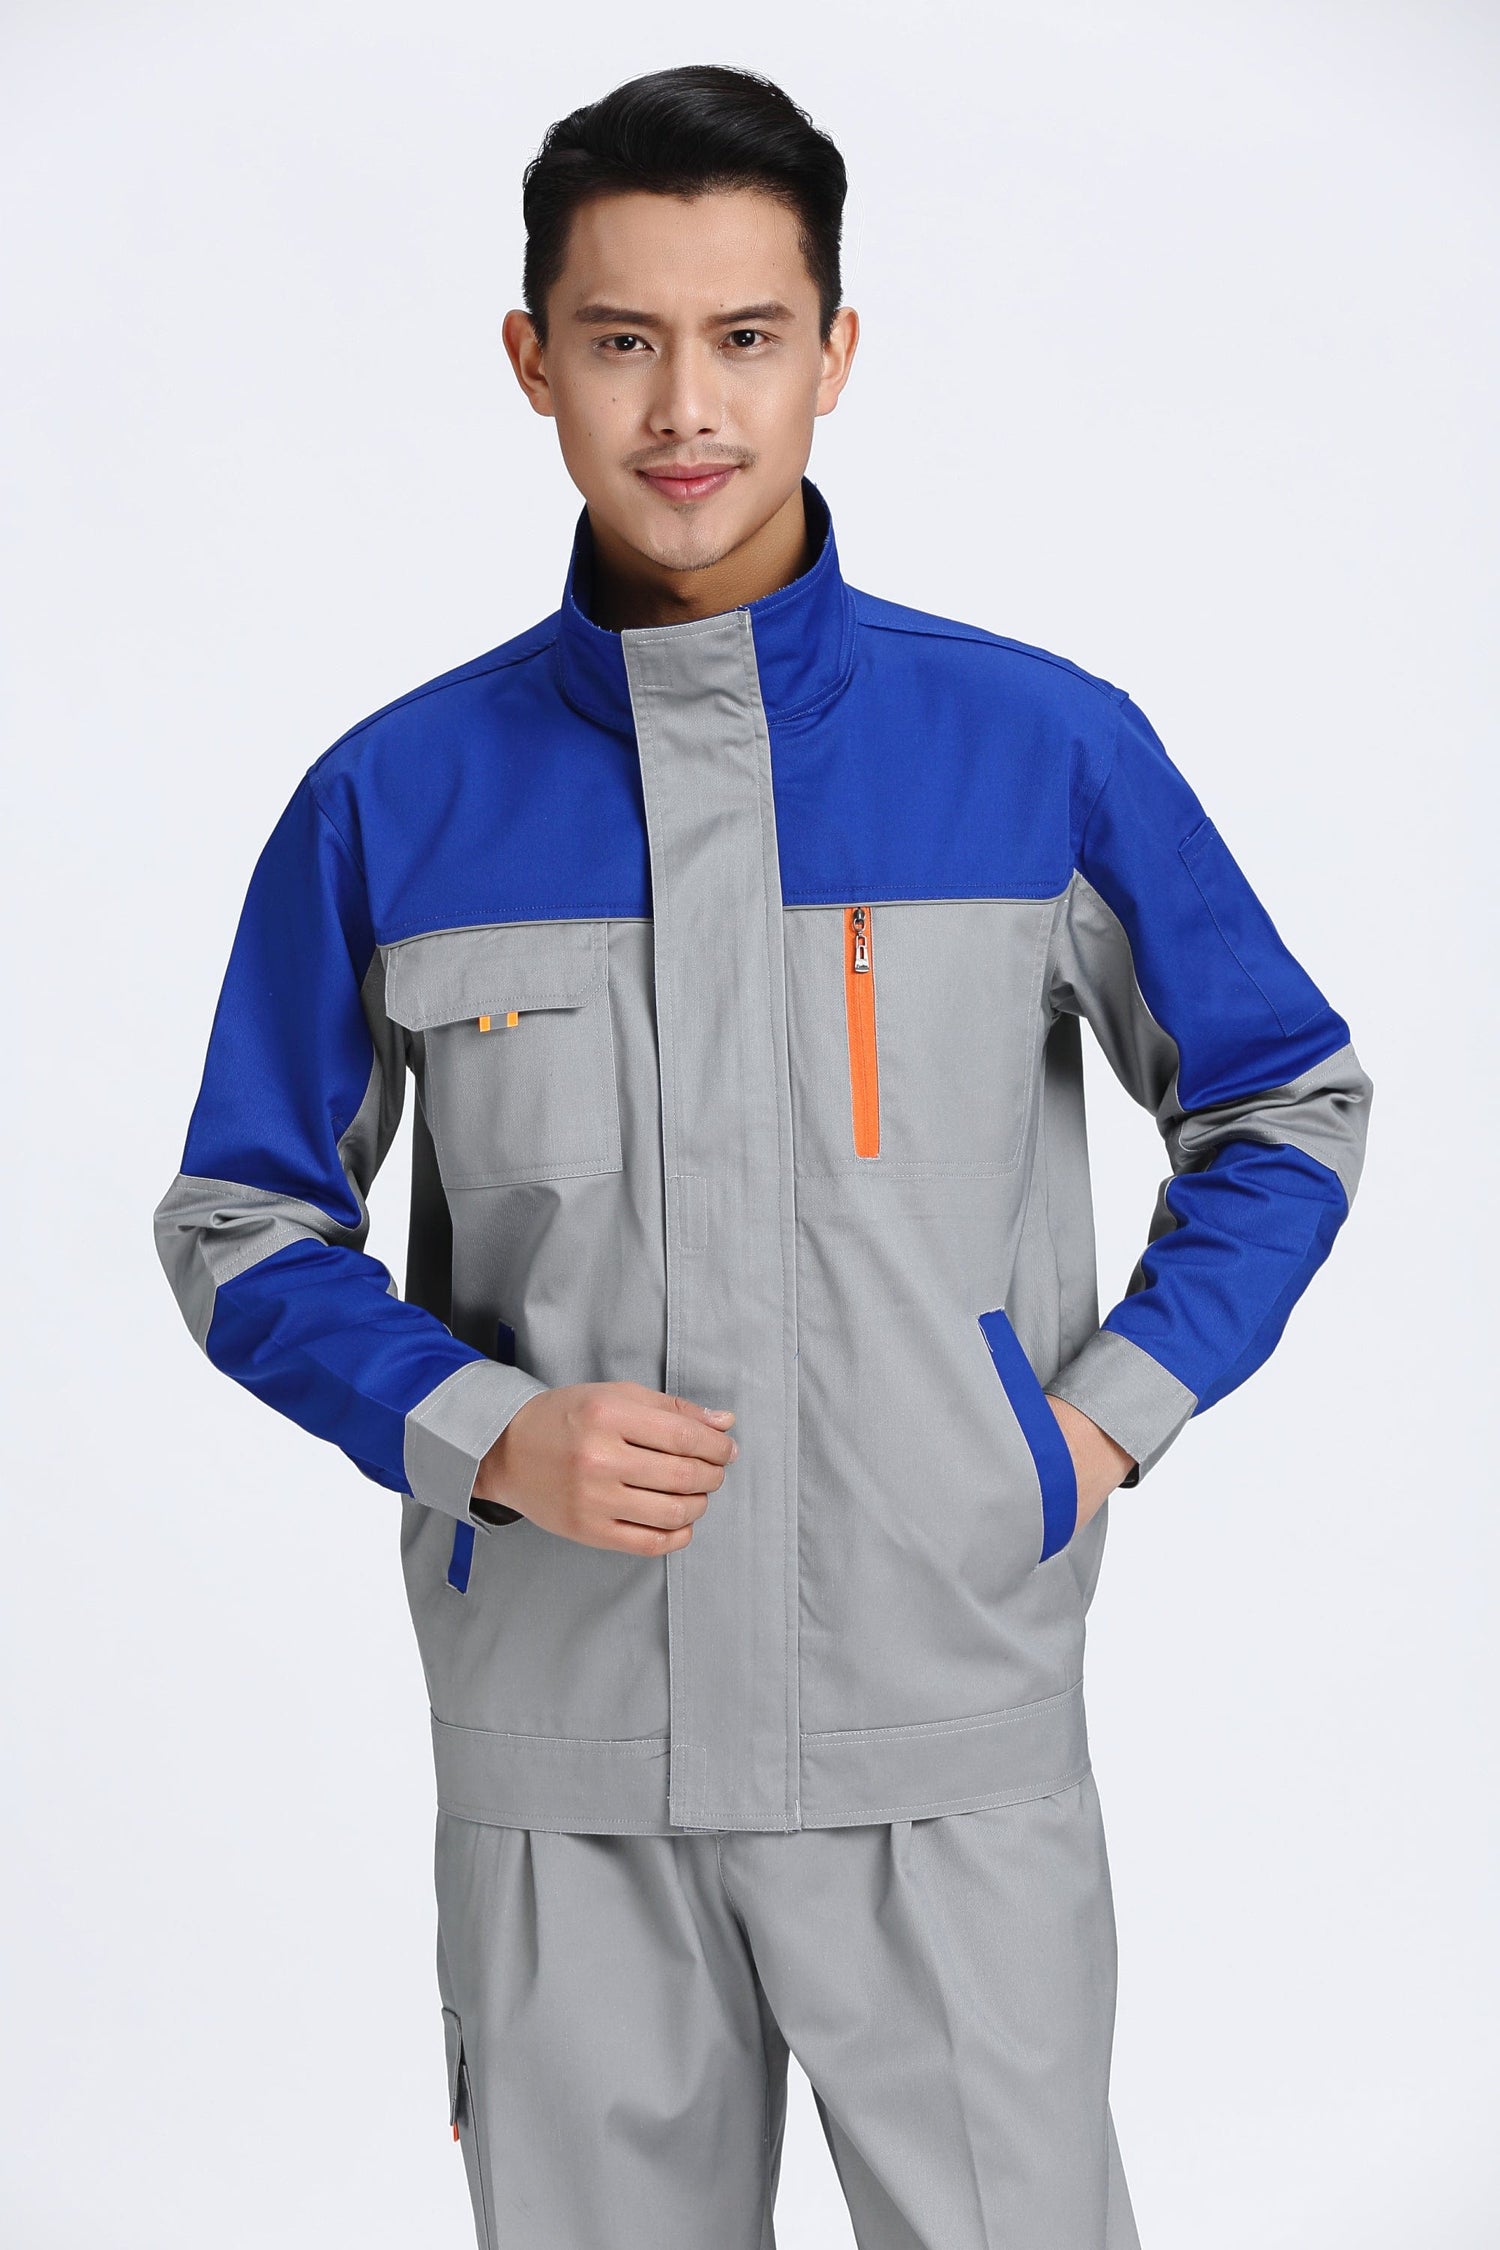 Corals Trading Co. 可樂思百貨商行 涤棉 Spring and Autumn Long Sleeve Polyester-Cotton Workwear SD-W2505